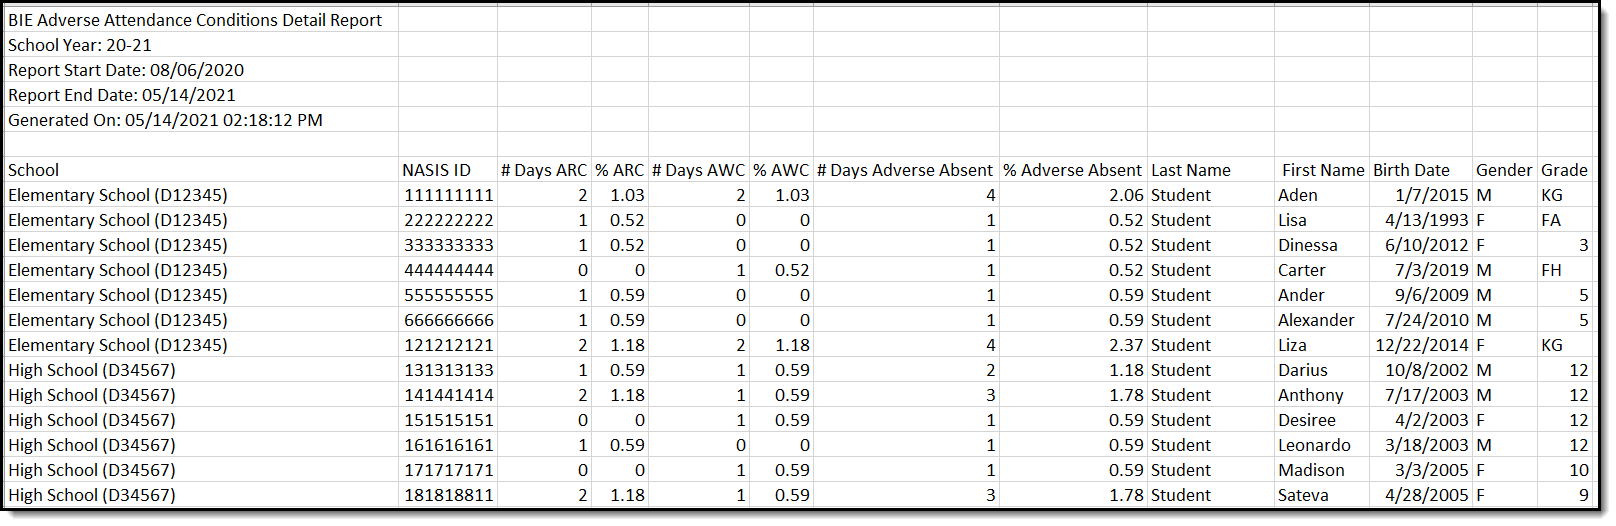 Screenshot of an example of the BIE Adverse Attendance Conditions Detail Report.